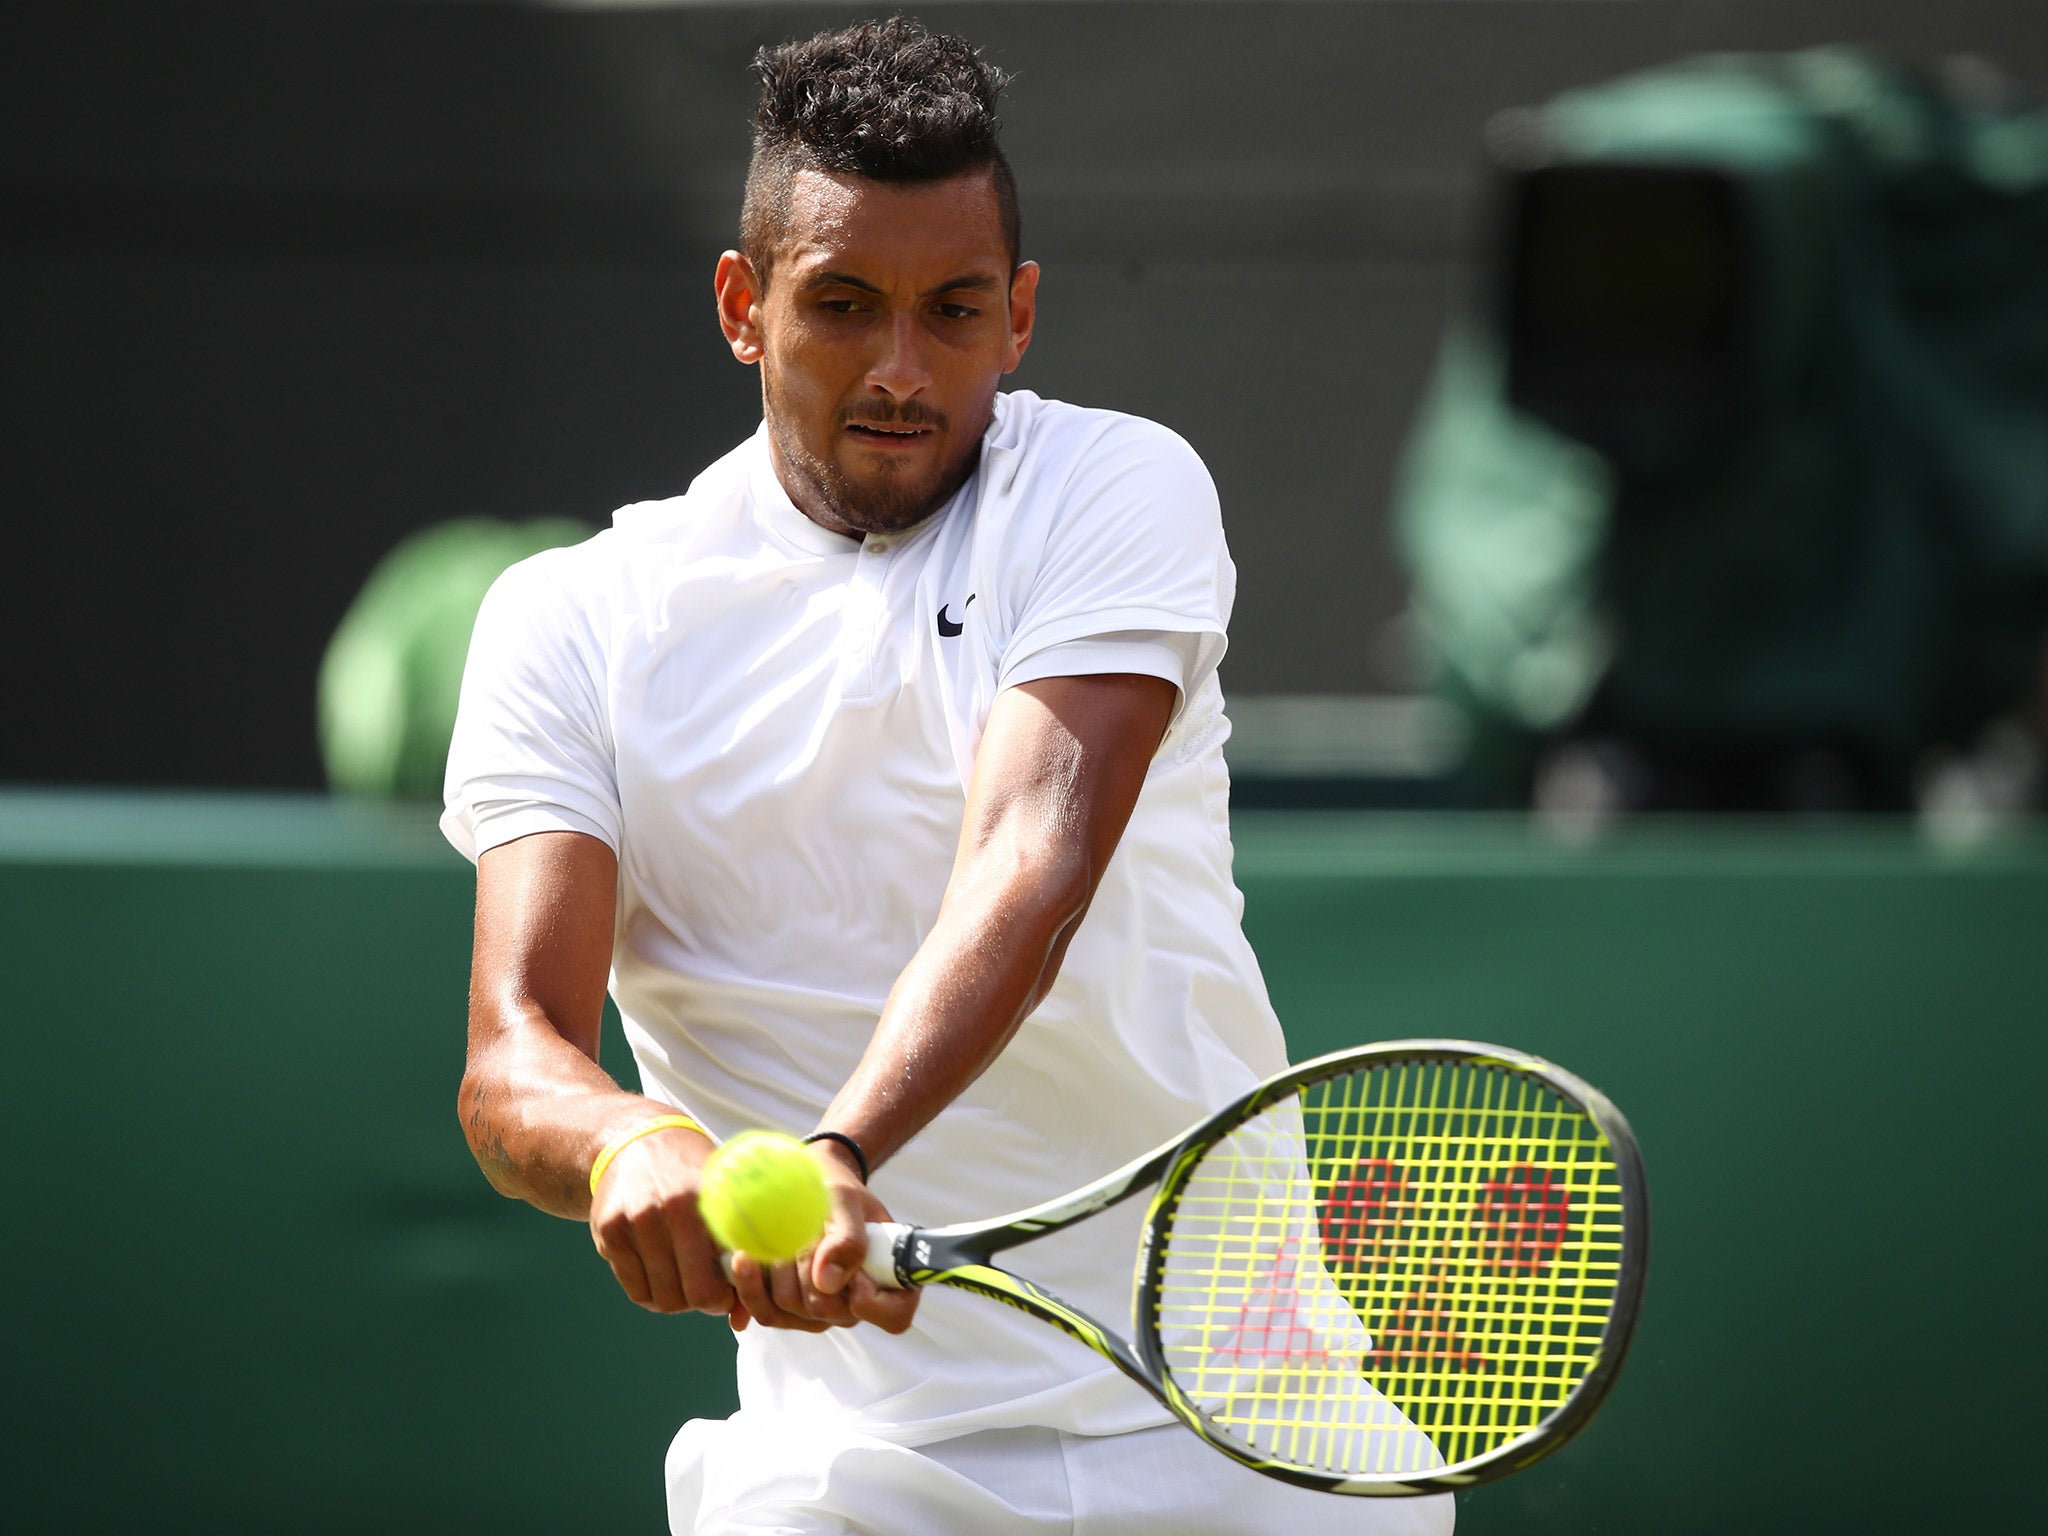 Nick Kyrgios will face Andy Murray in the fourth round at Wimbledon